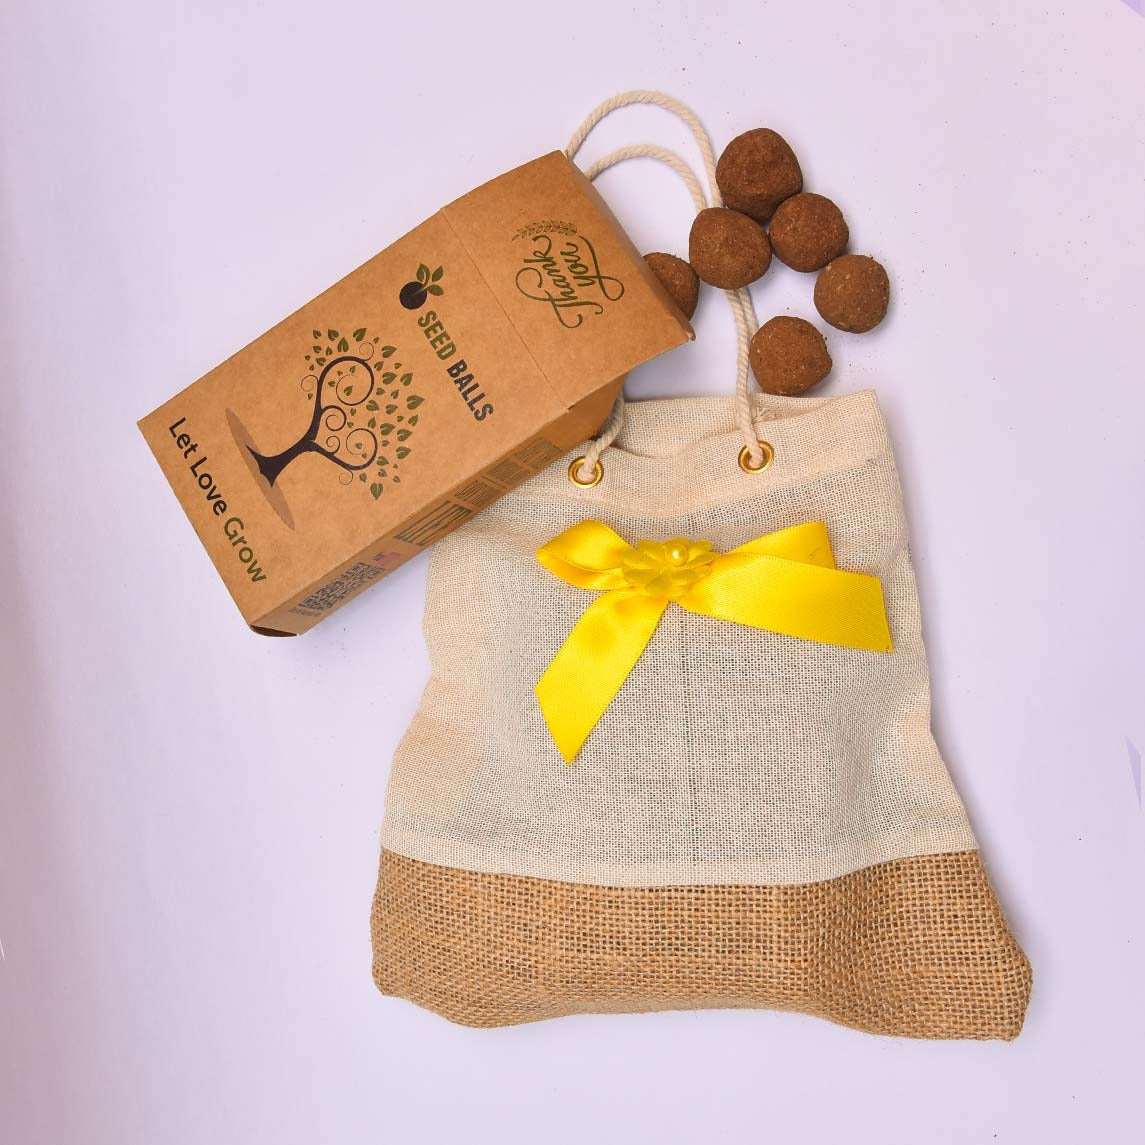 Wedding Return Gifts - 6 Assorted Seed Balls Marriage Gifts